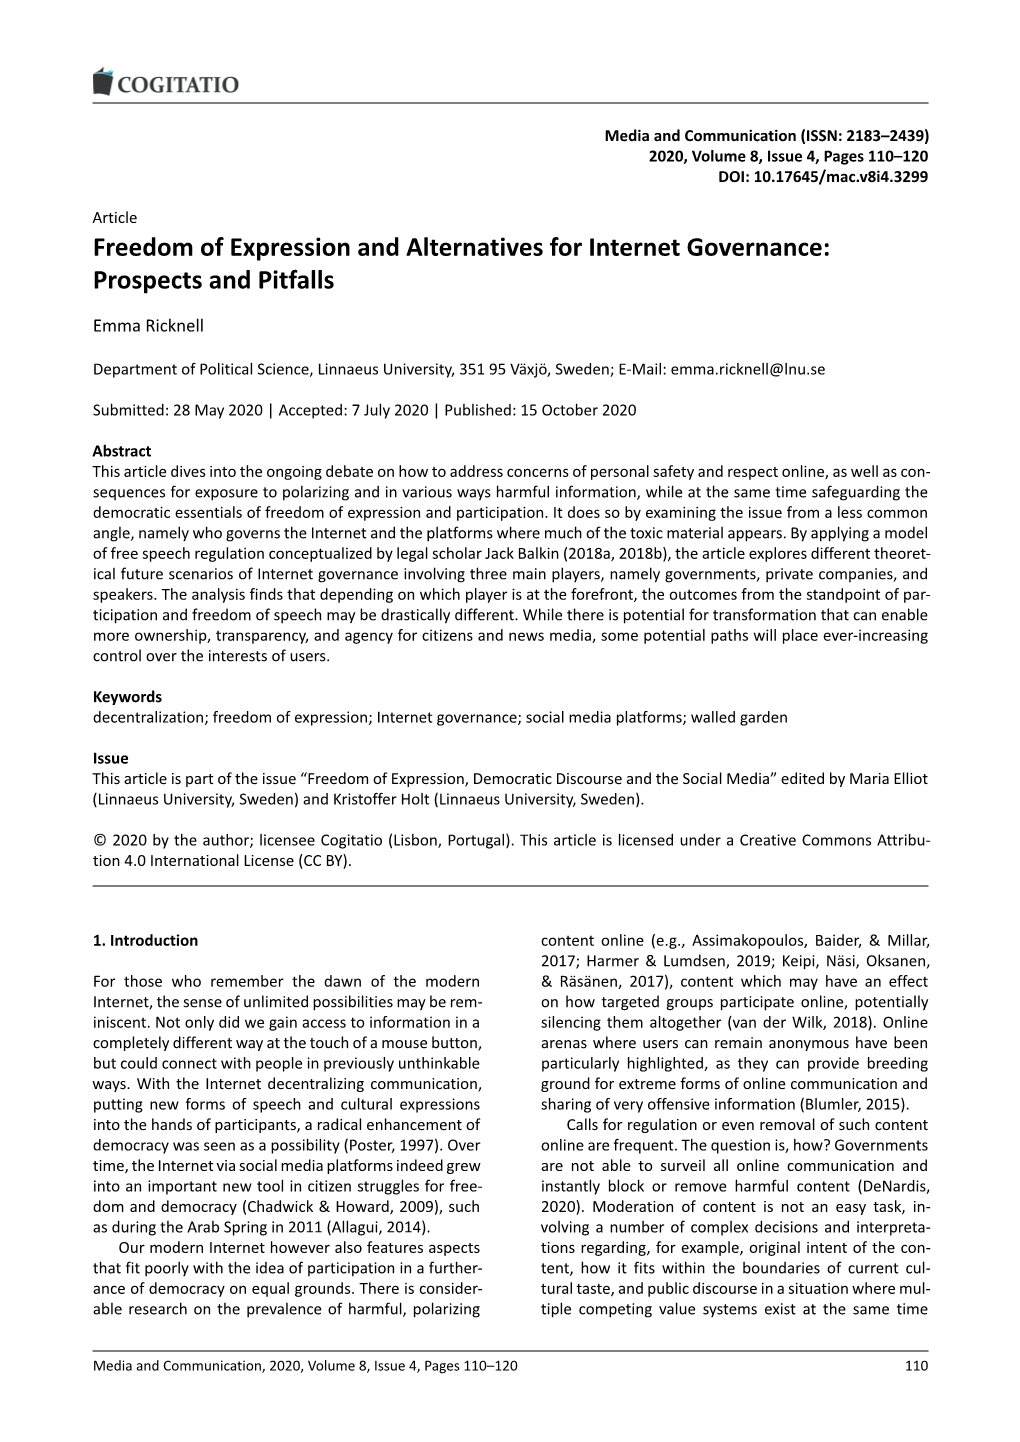 Freedom of Expression and Alternatives for Internet Governance: Prospects and Pitfalls